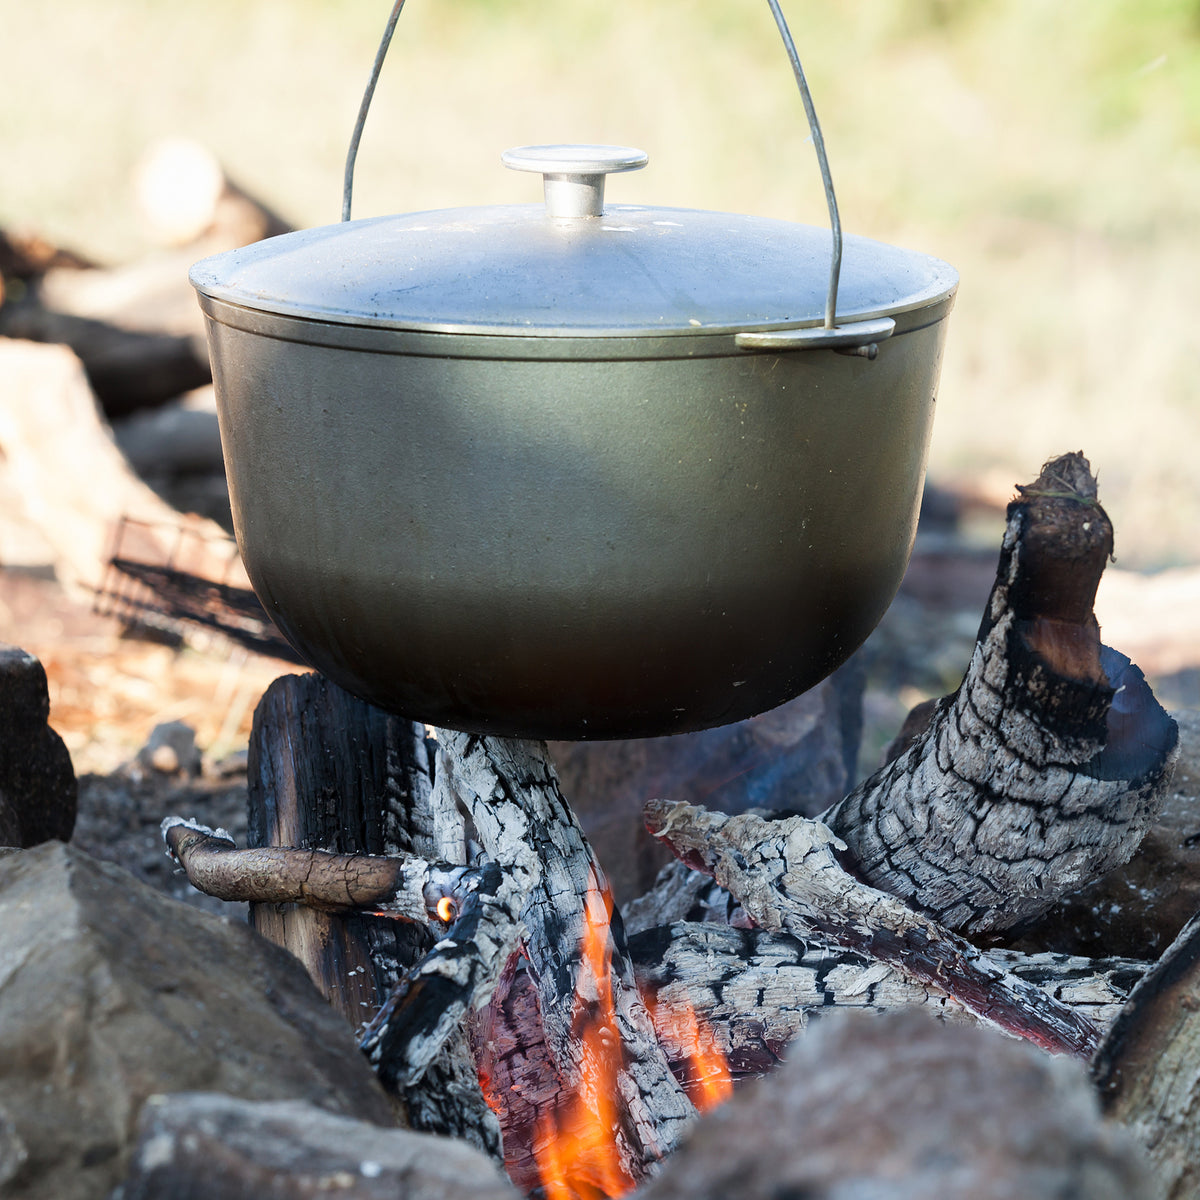 Rondack Campfire Tripod | Compact Campfire Cooking Tool